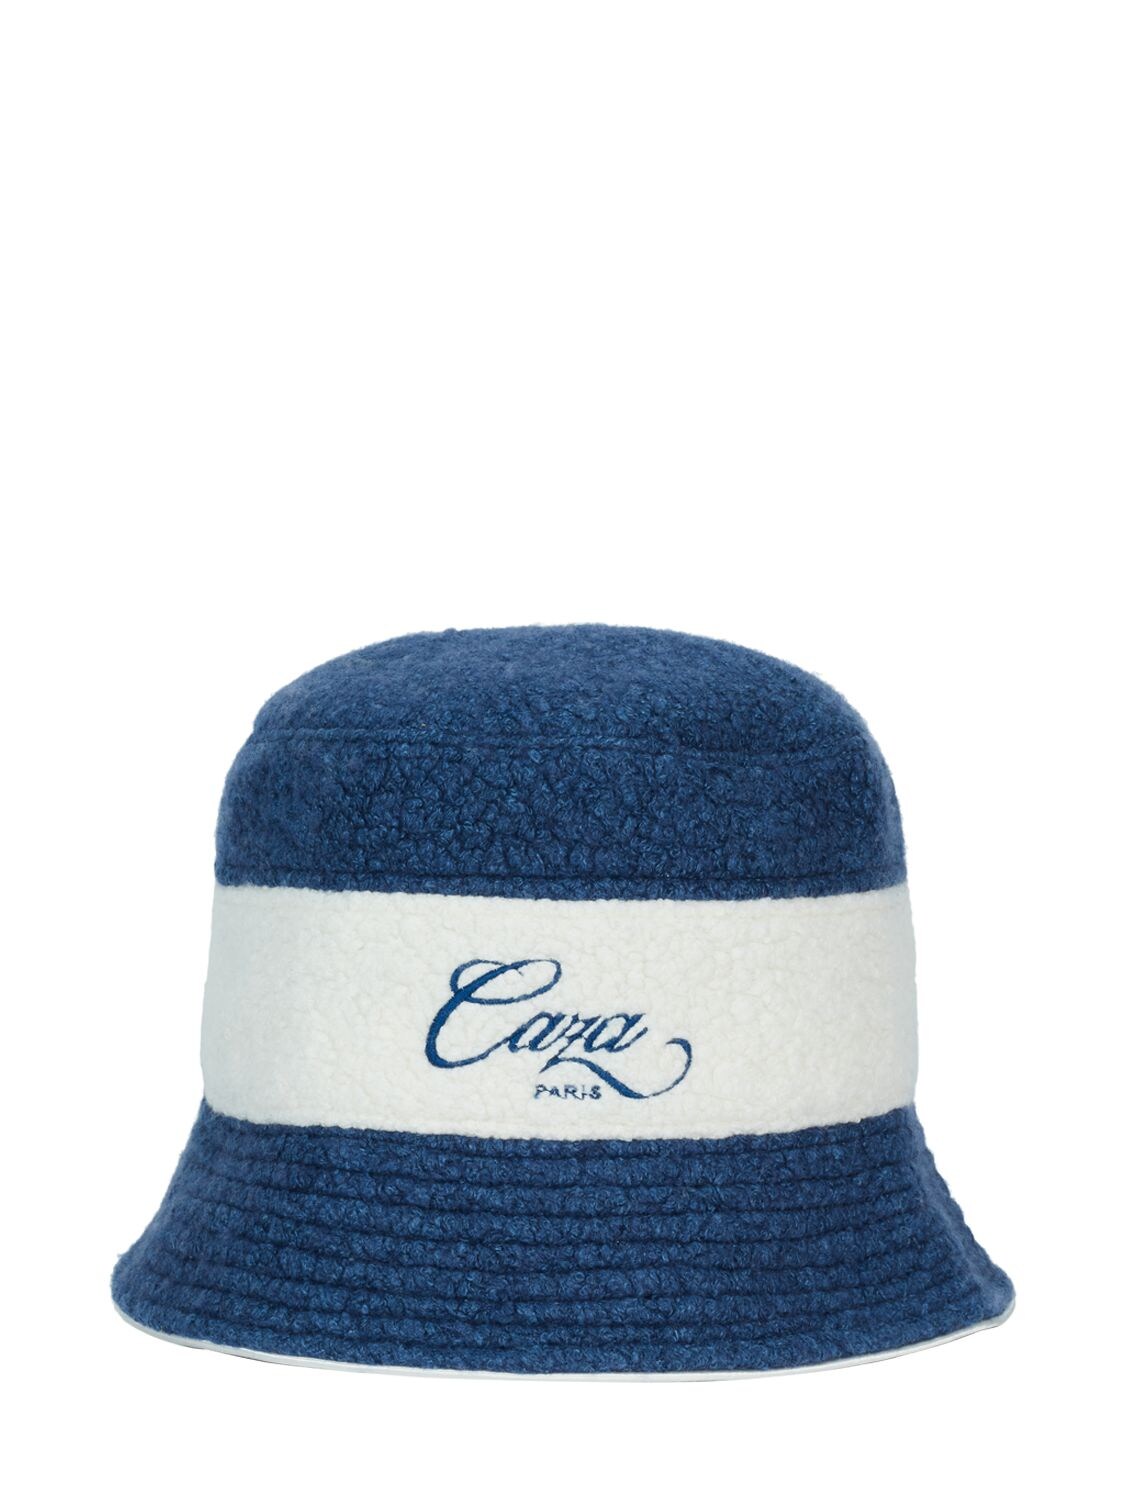 Caza Embroidered Wool Bucket Hat